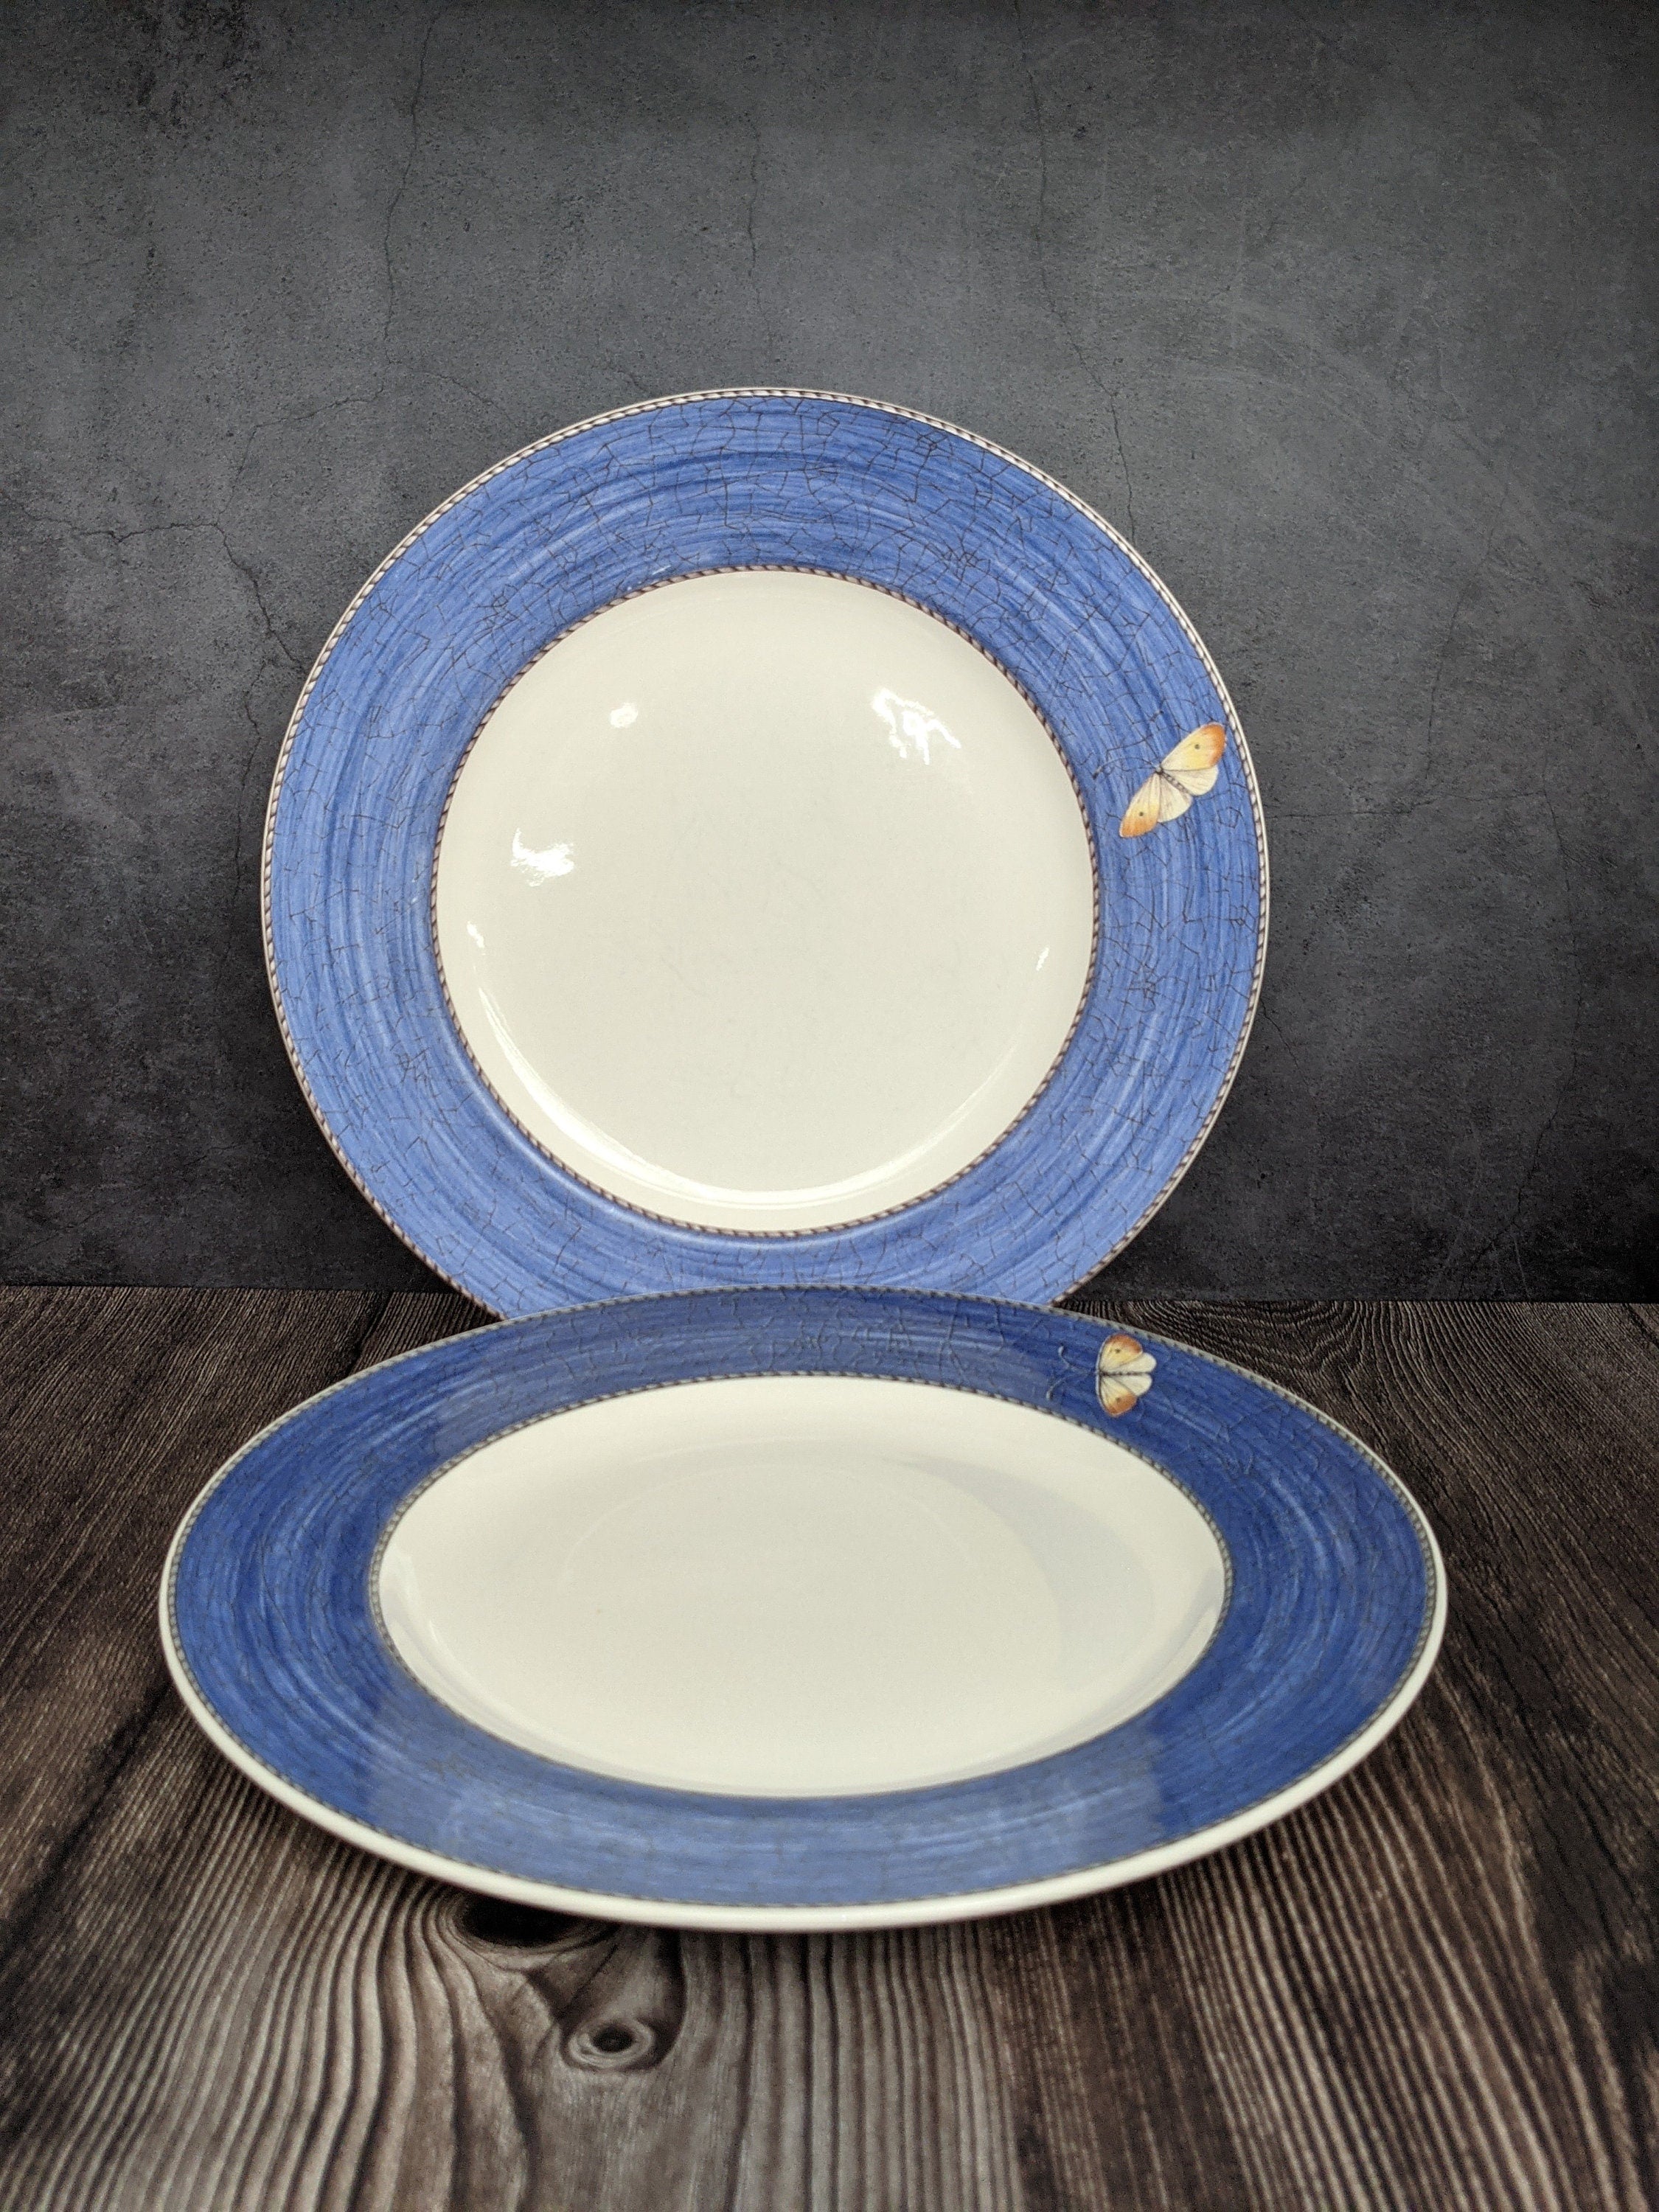 2 Vintage Wedgwood Sarah's Garden Blue Dinner Plates, Queen's Ware, Made in  England C.1997